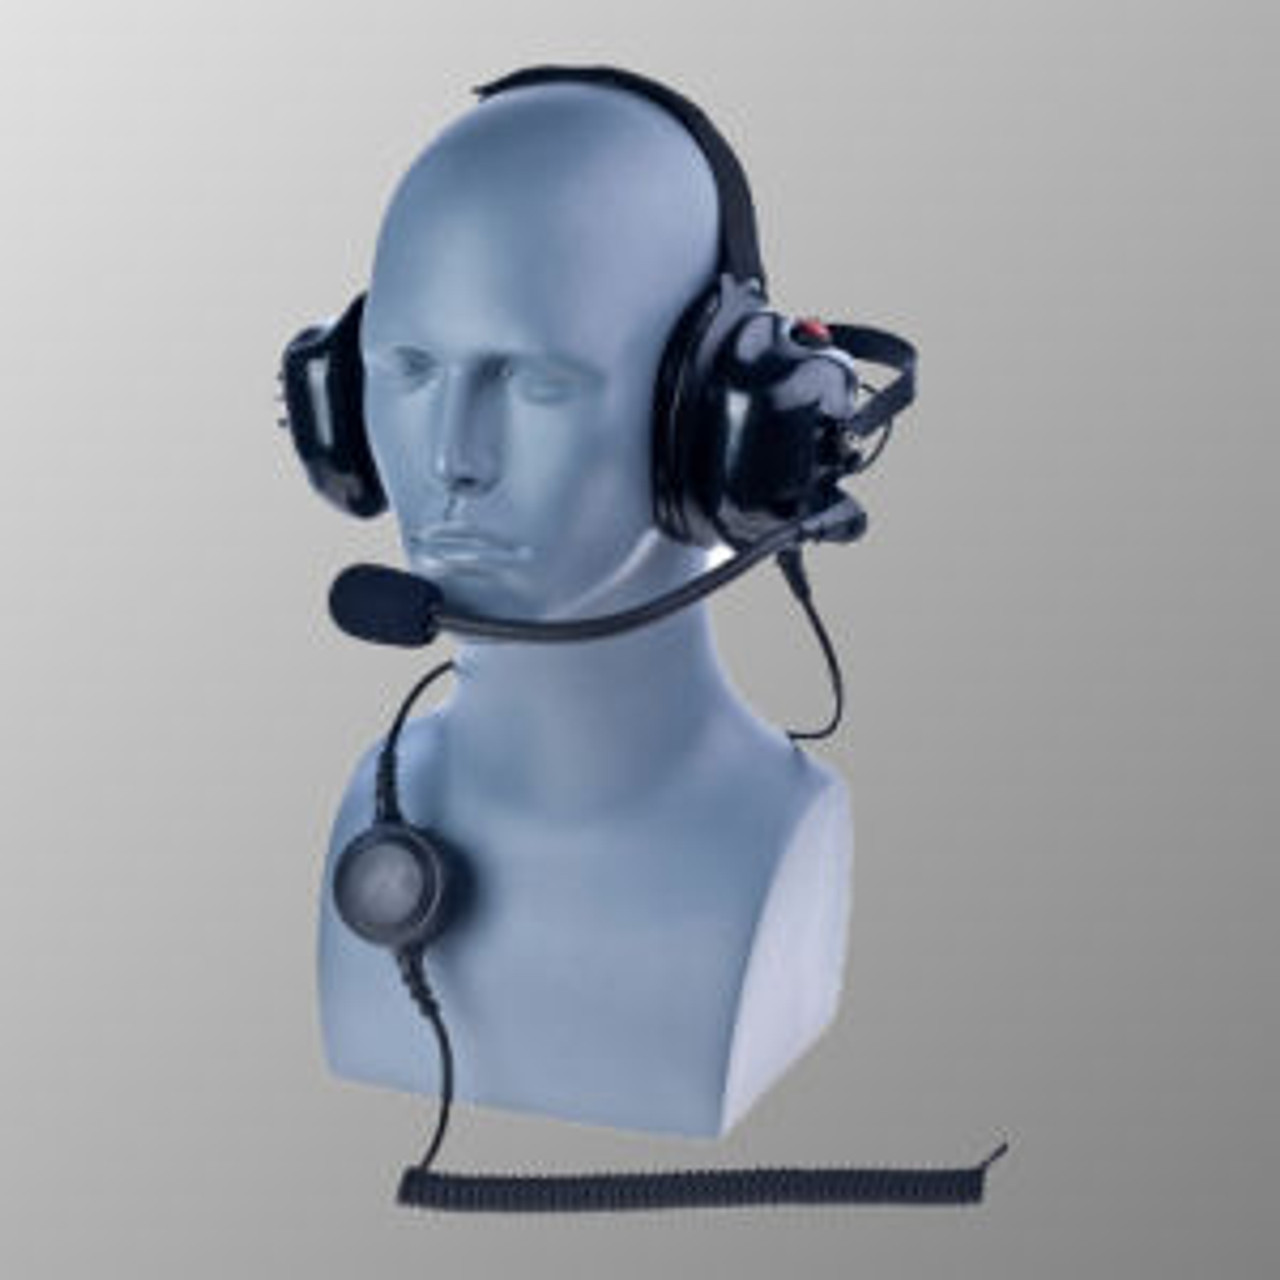 HYT / Hytera PD562 Noise Canceling Behind The Head Double Muff Headset